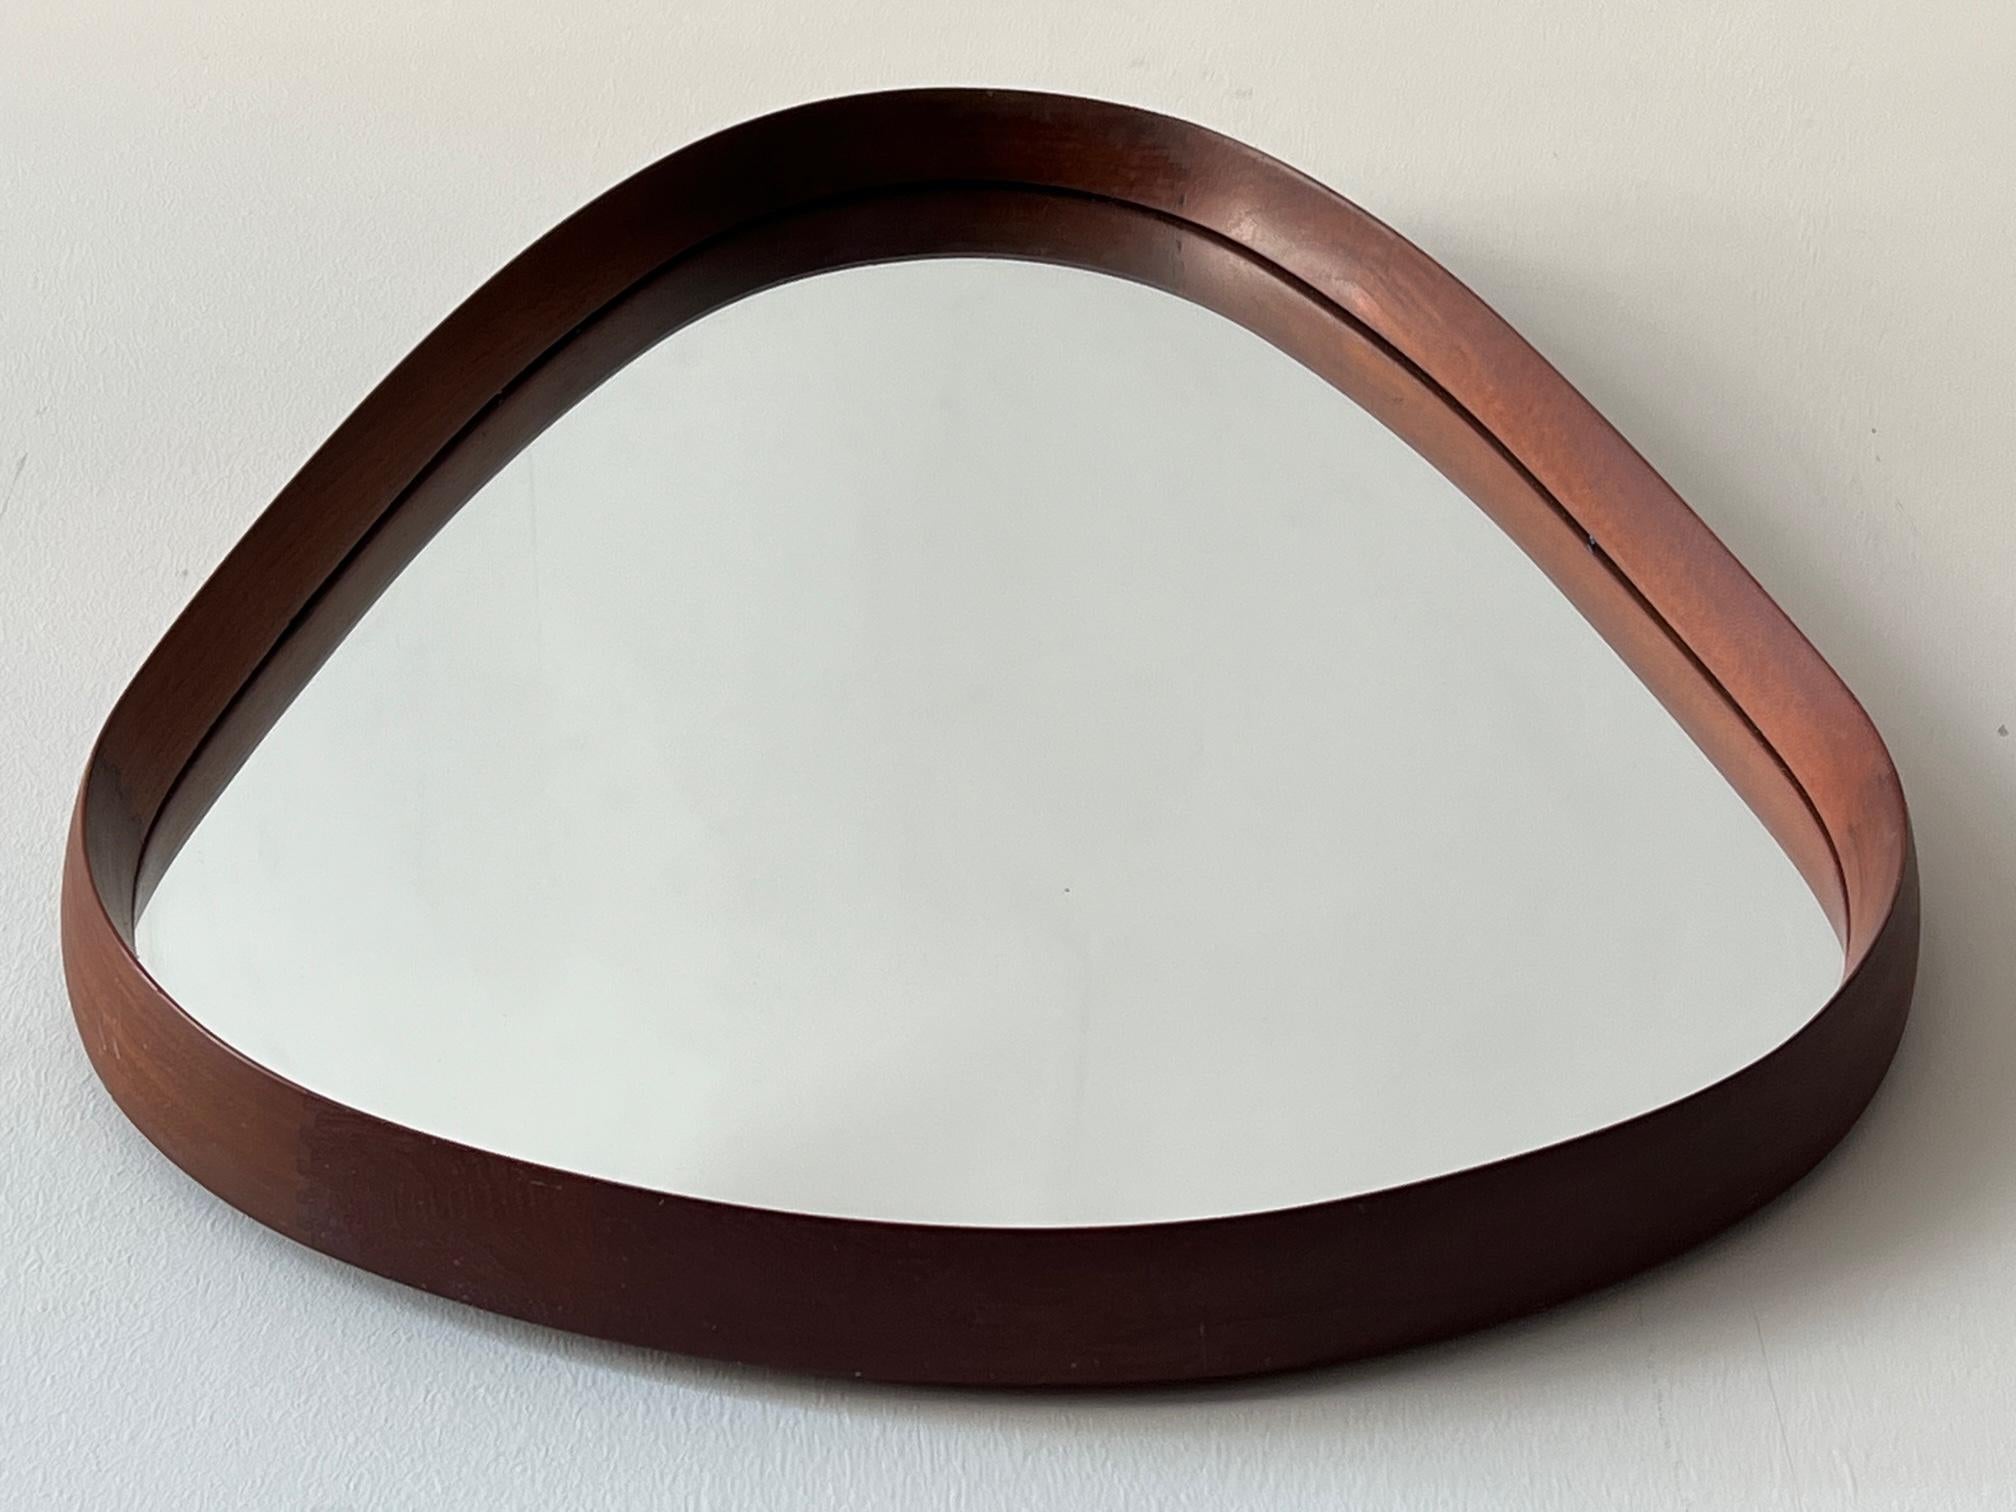 An unusual Danish teak tear drop shape mirror. Nicely finger joined and sculptural look. Could be hung either way.